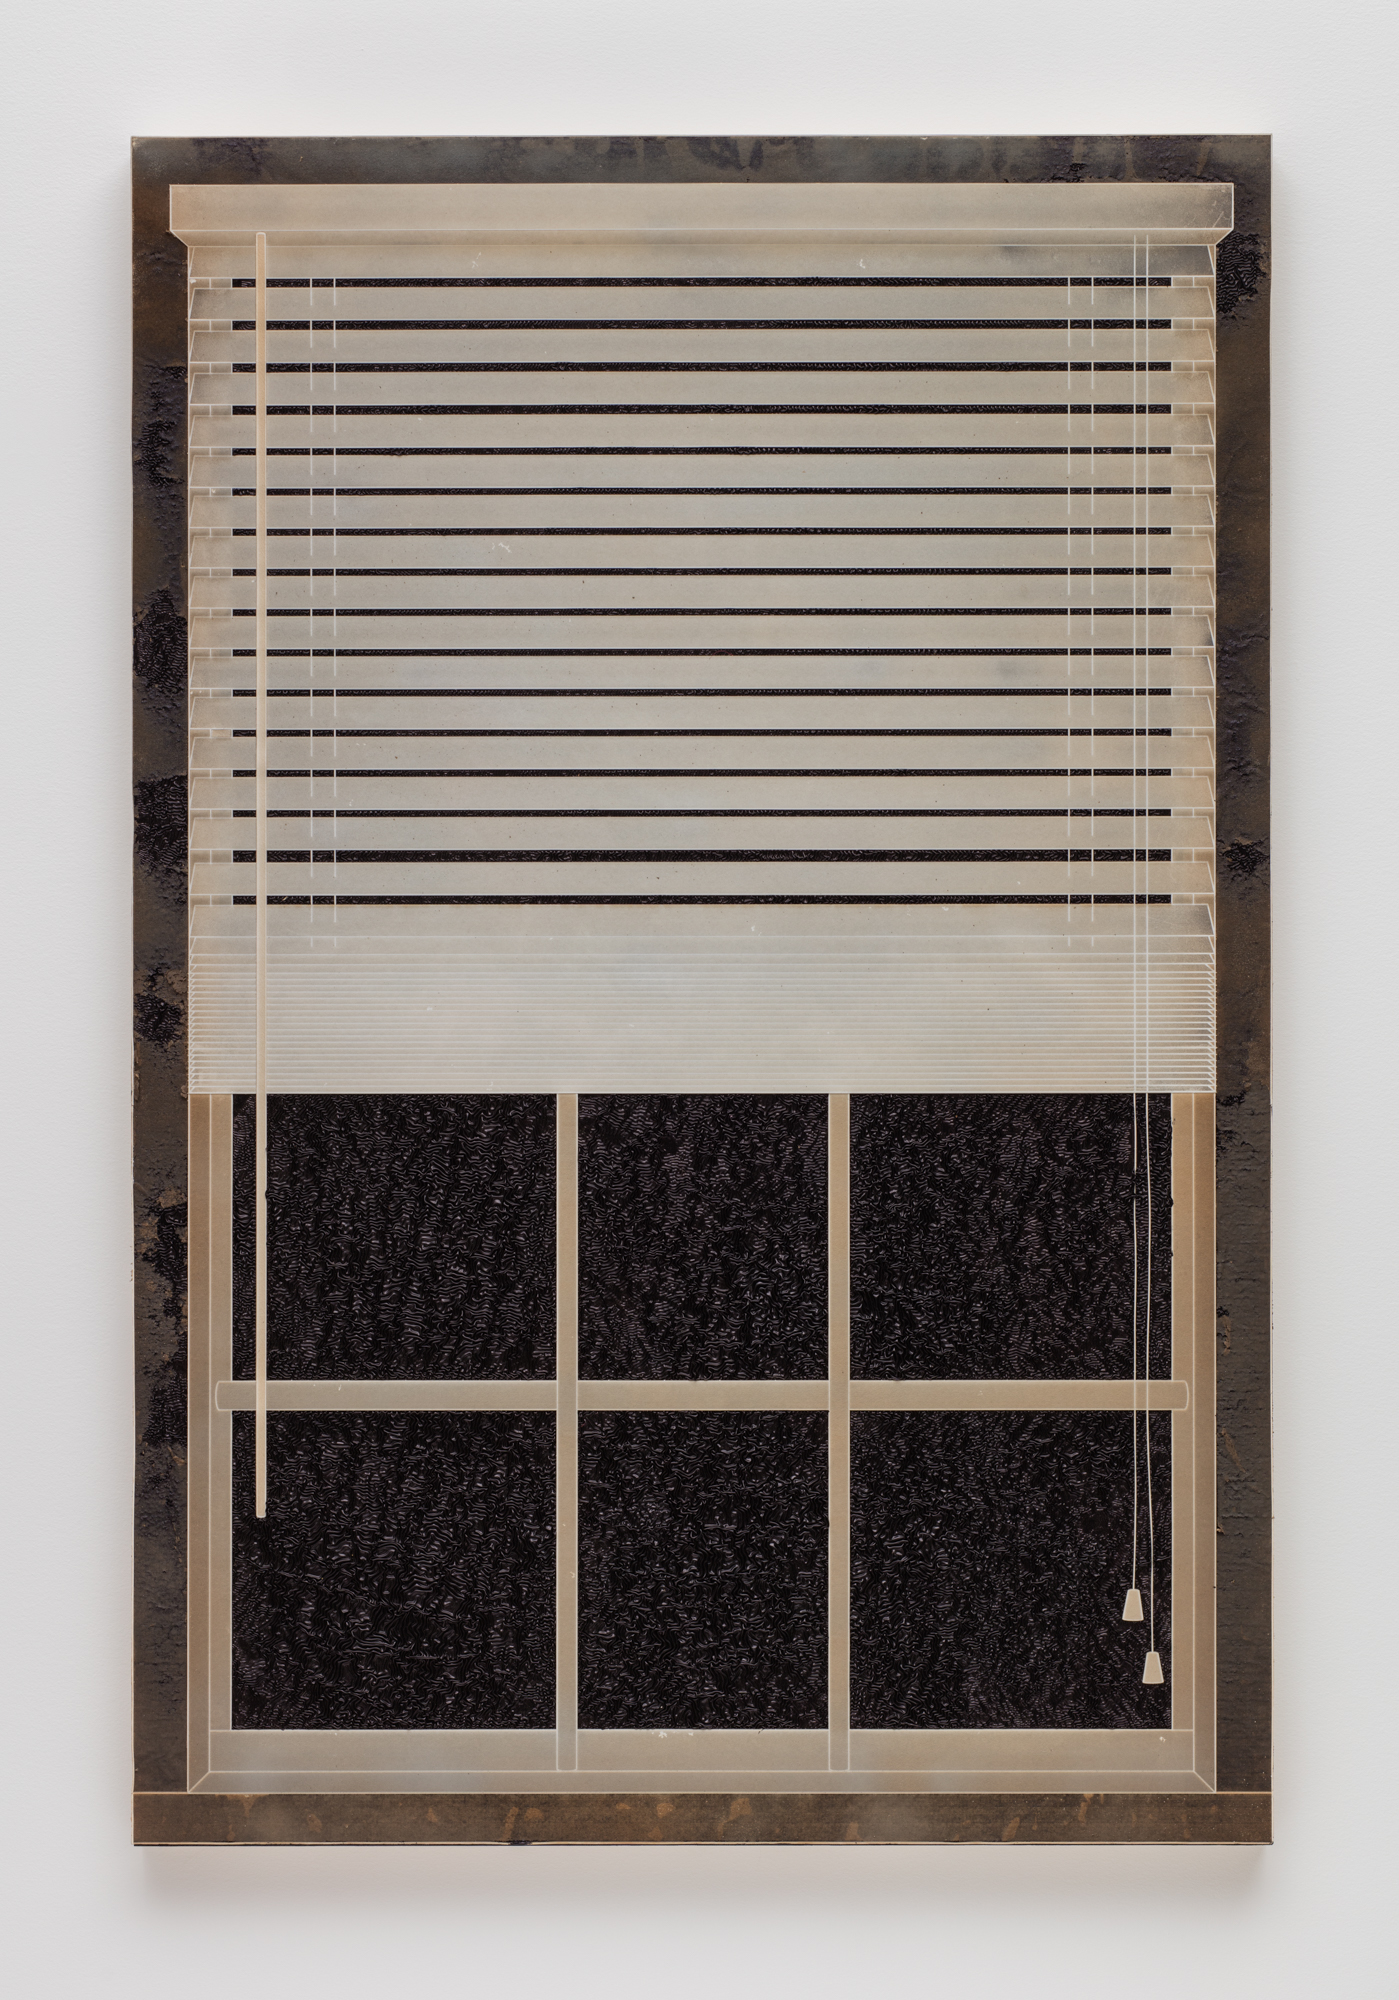 Analia Saban, Pleated Ink, Window with Blinds, 2017.  Laser-sculpted paper on ink on wood panel.  152.4 x 101.6 x 5.2 cm. Photo by Brian Forrest.